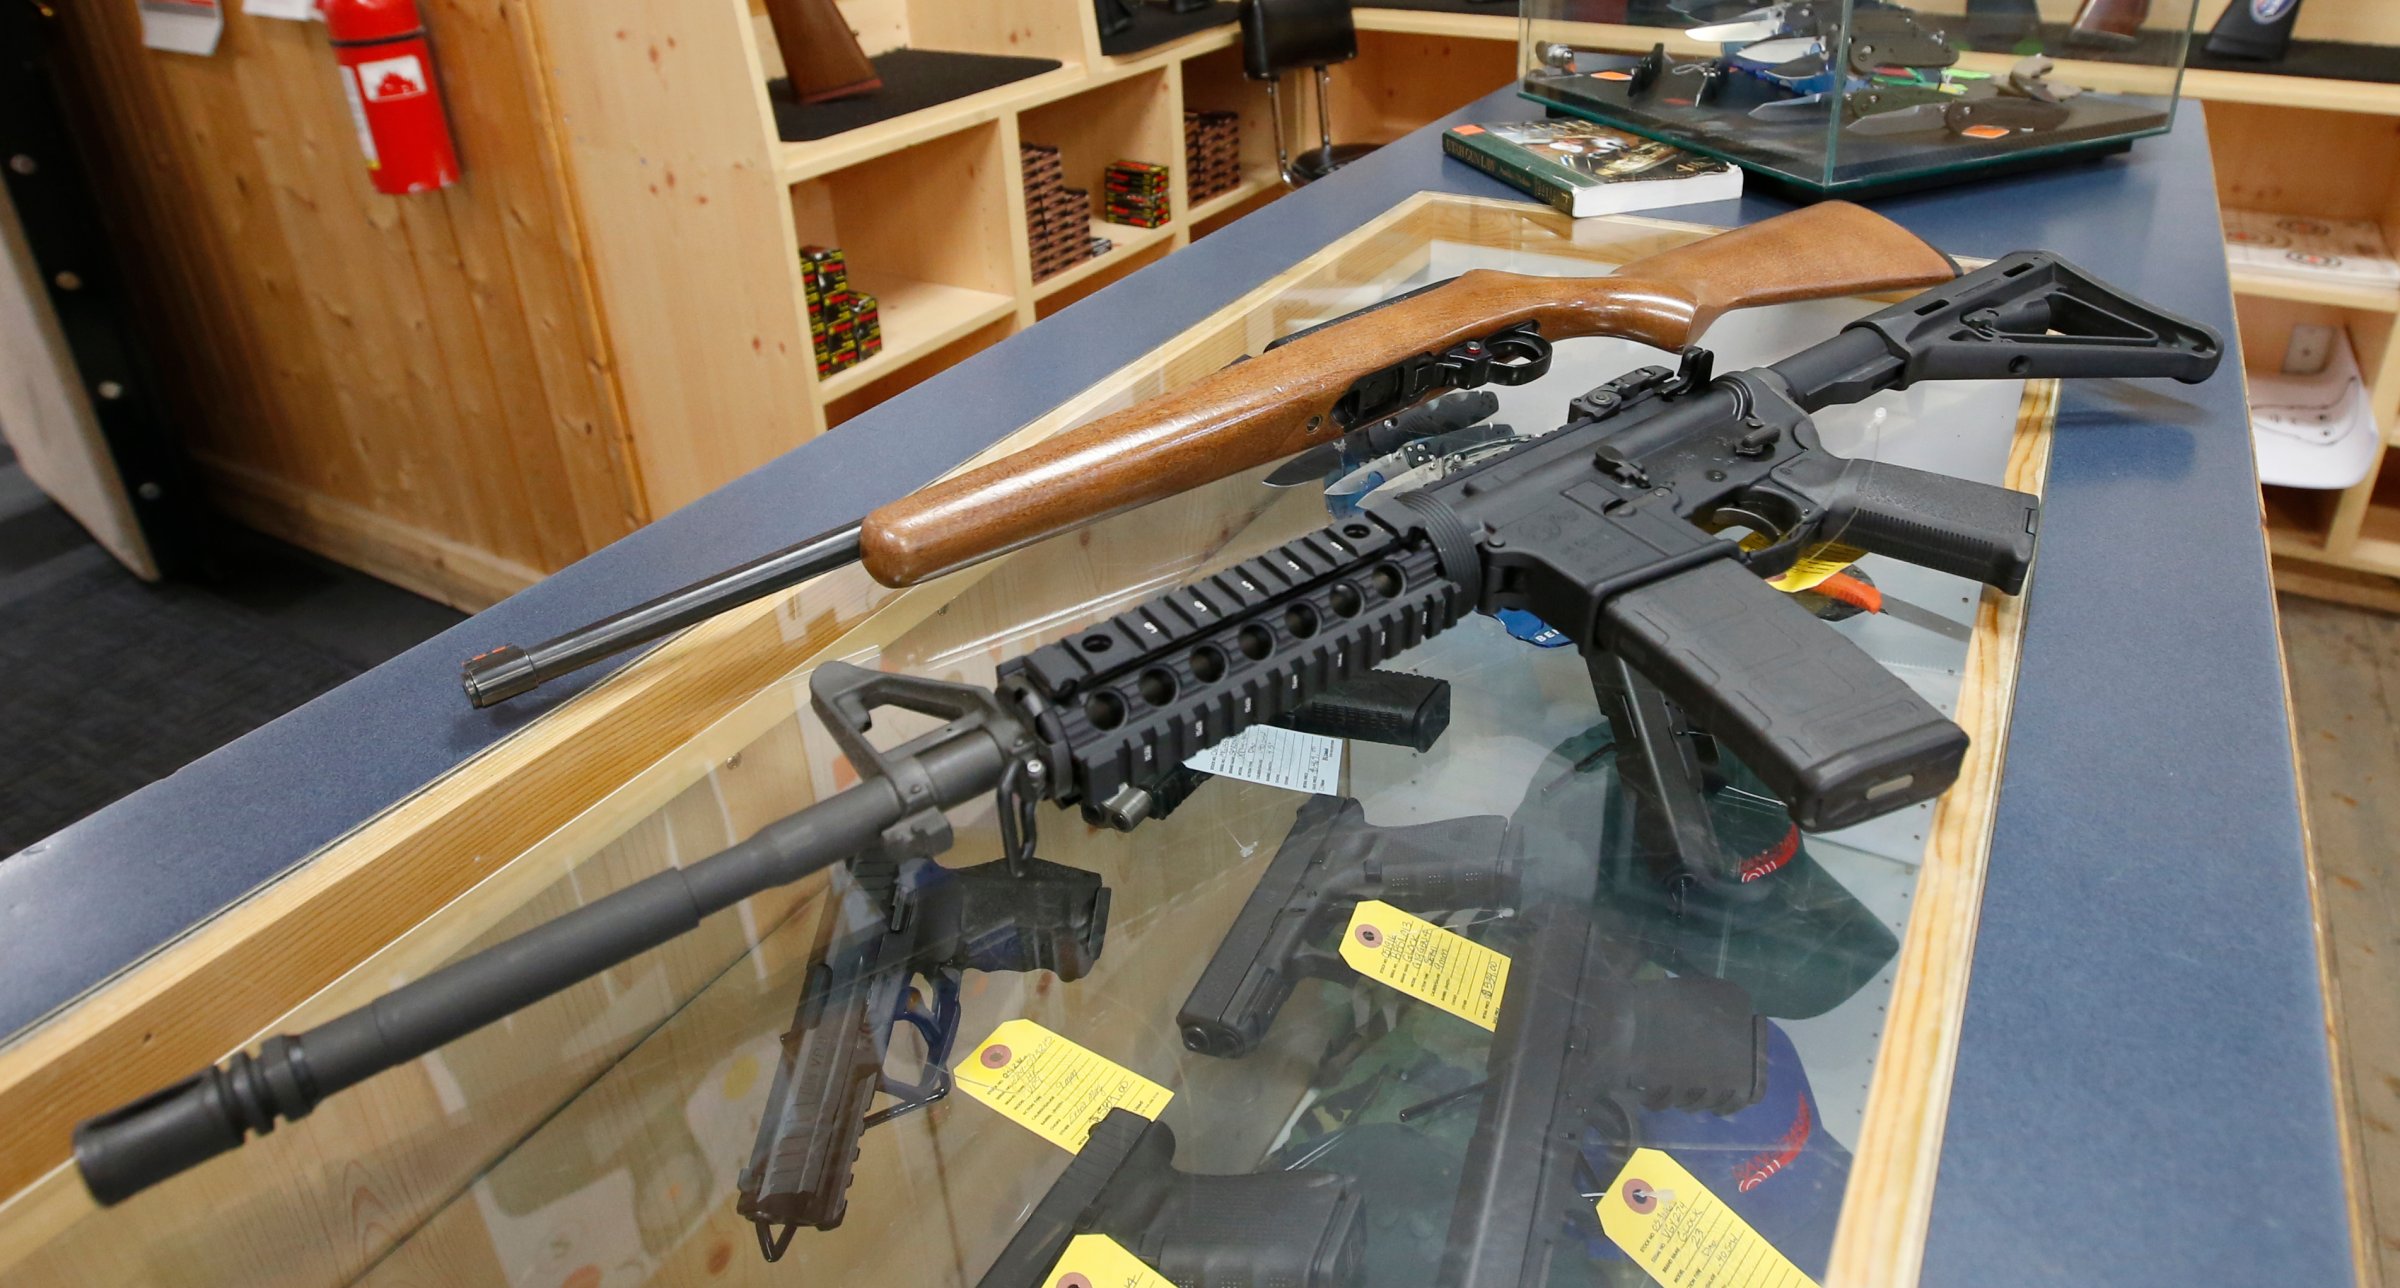 Sale Of Automatic Weapons Comes Under Scrutiny After Orlando Shootings